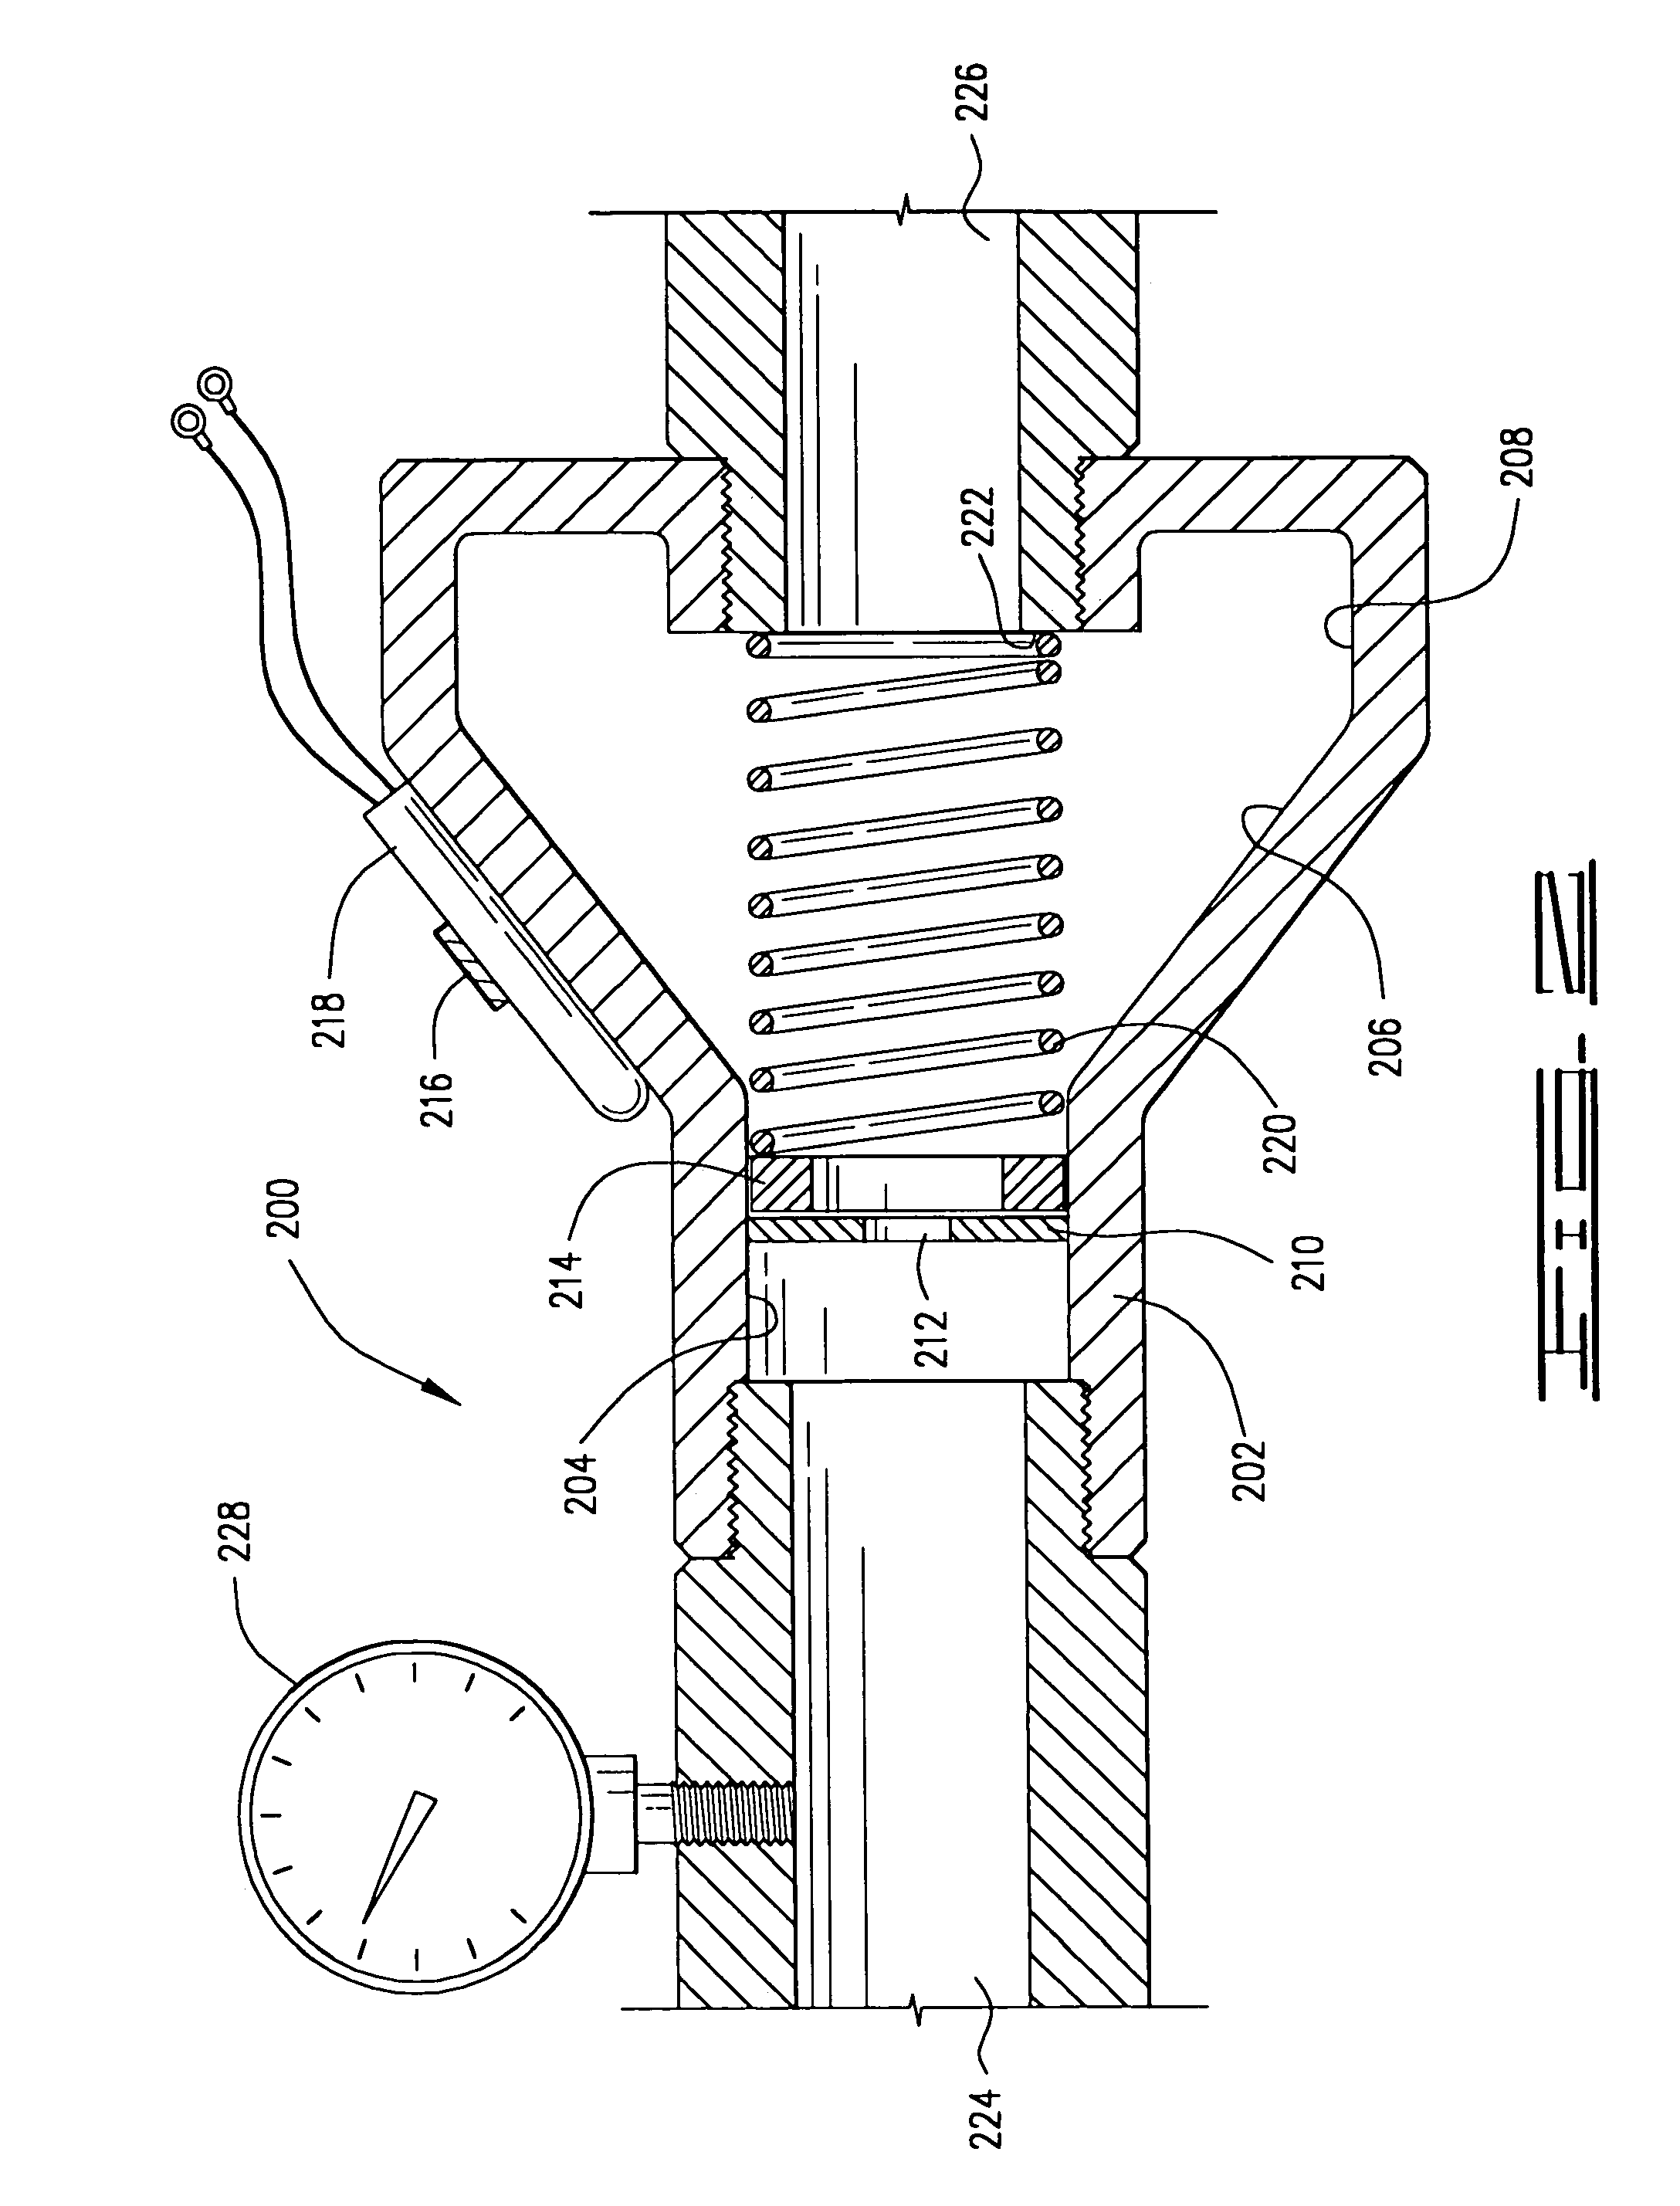 Apparatus for flow detection, measurement and control and method for use of same